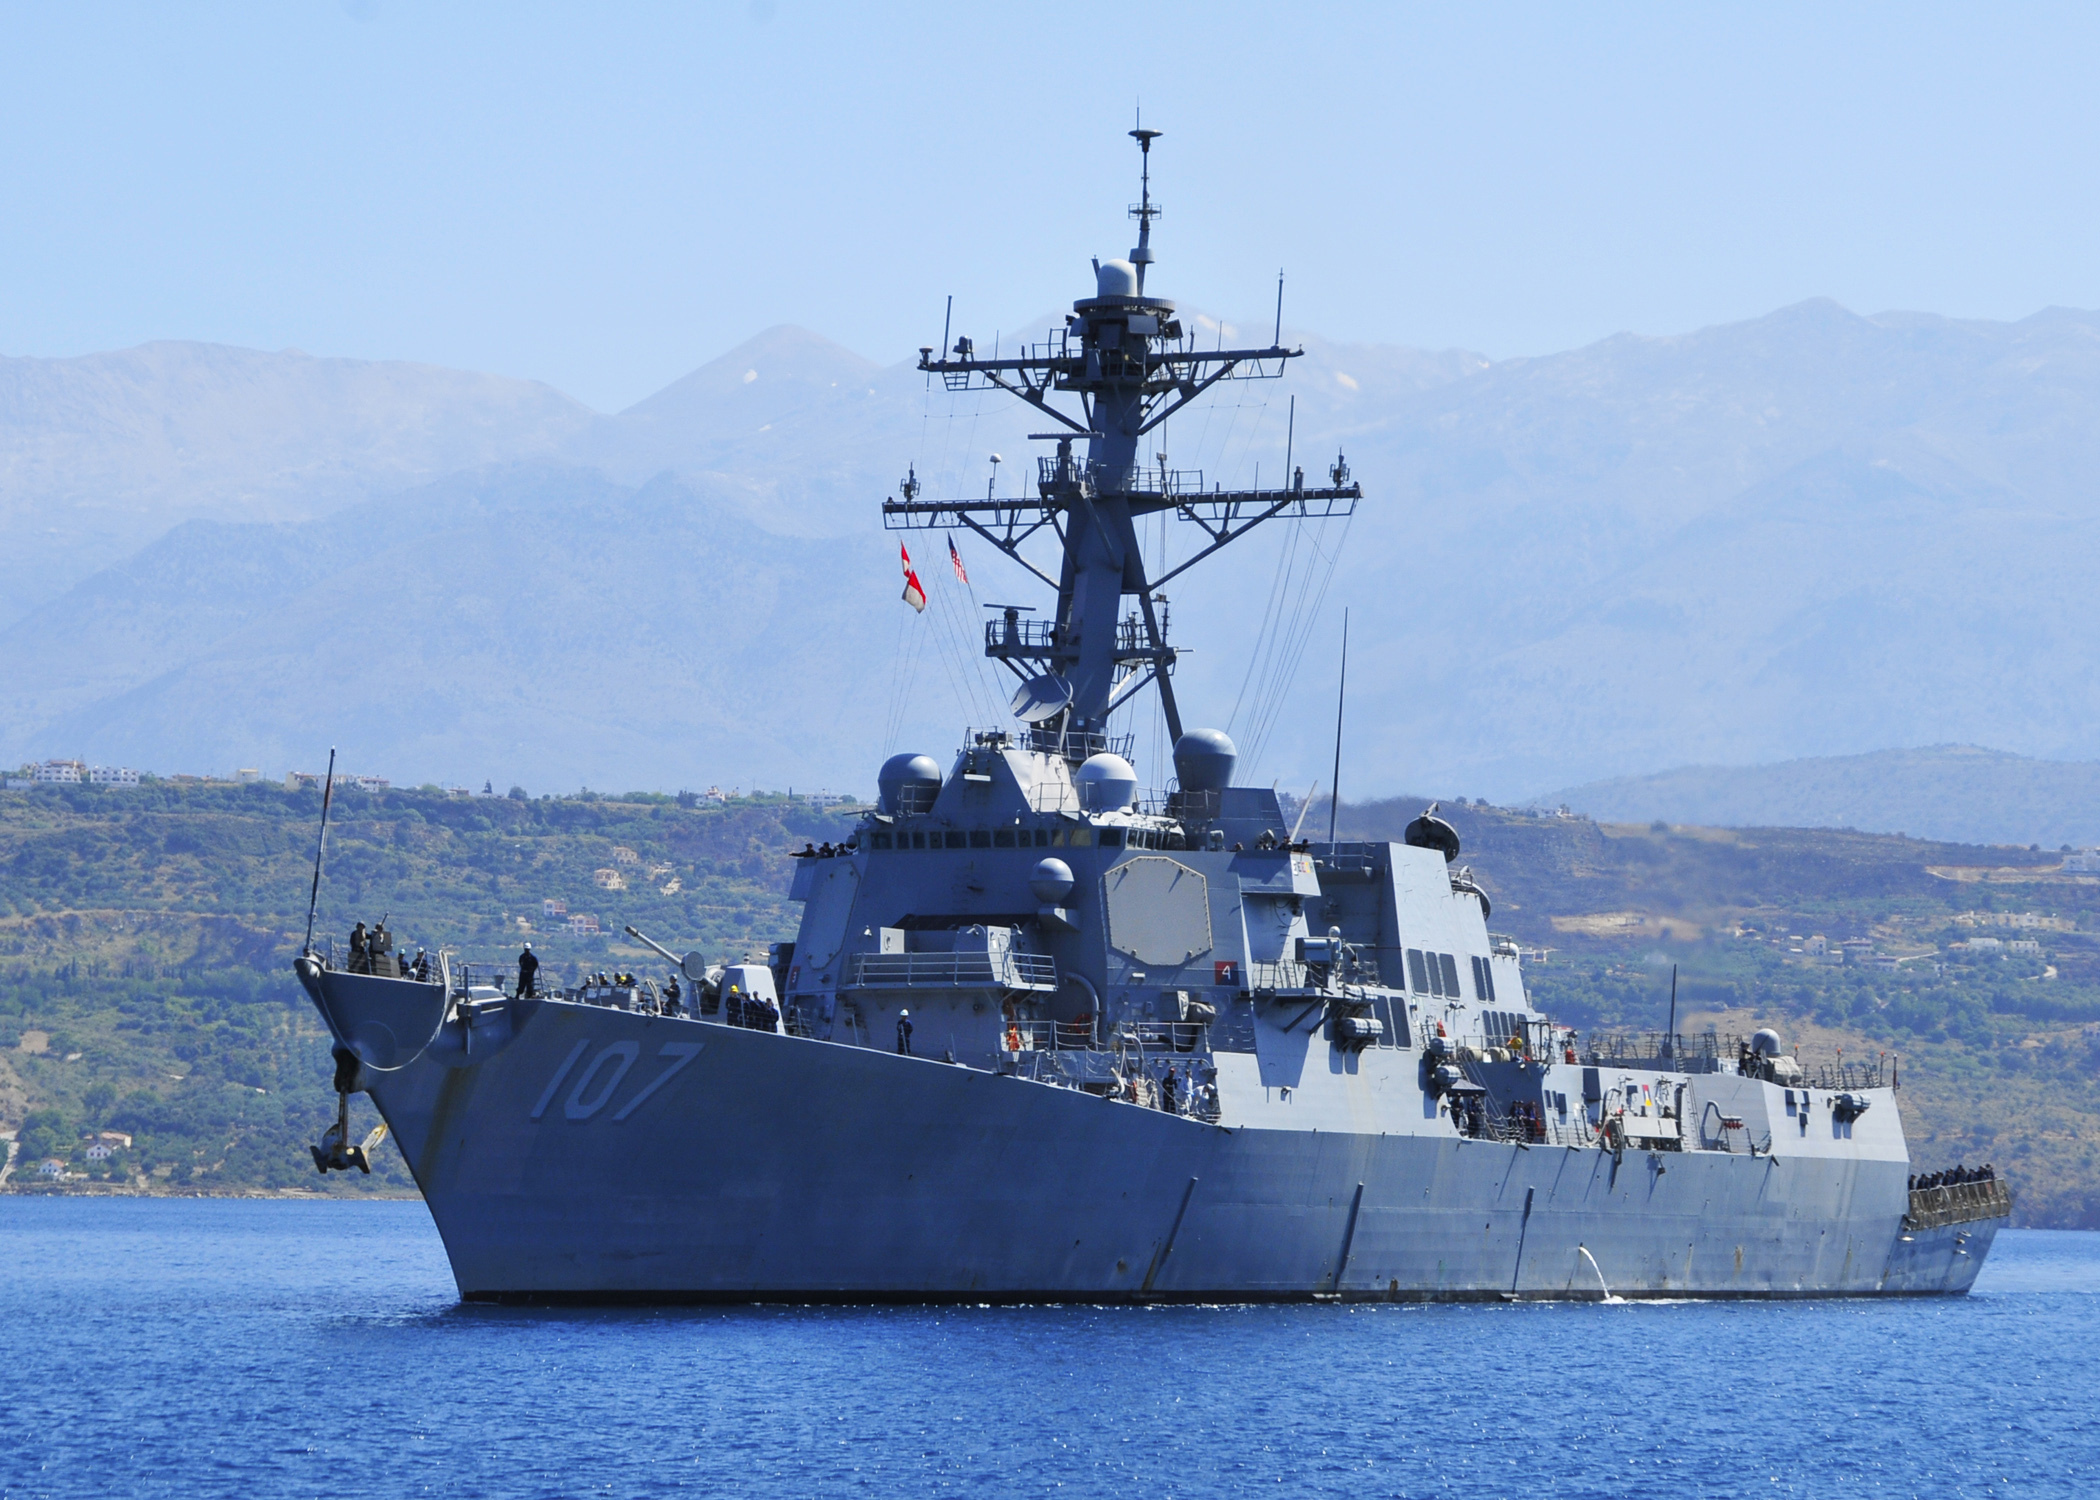 U.S. Warships, Commercial Vessels Unsafe in Red Sea and Gulf of Aden